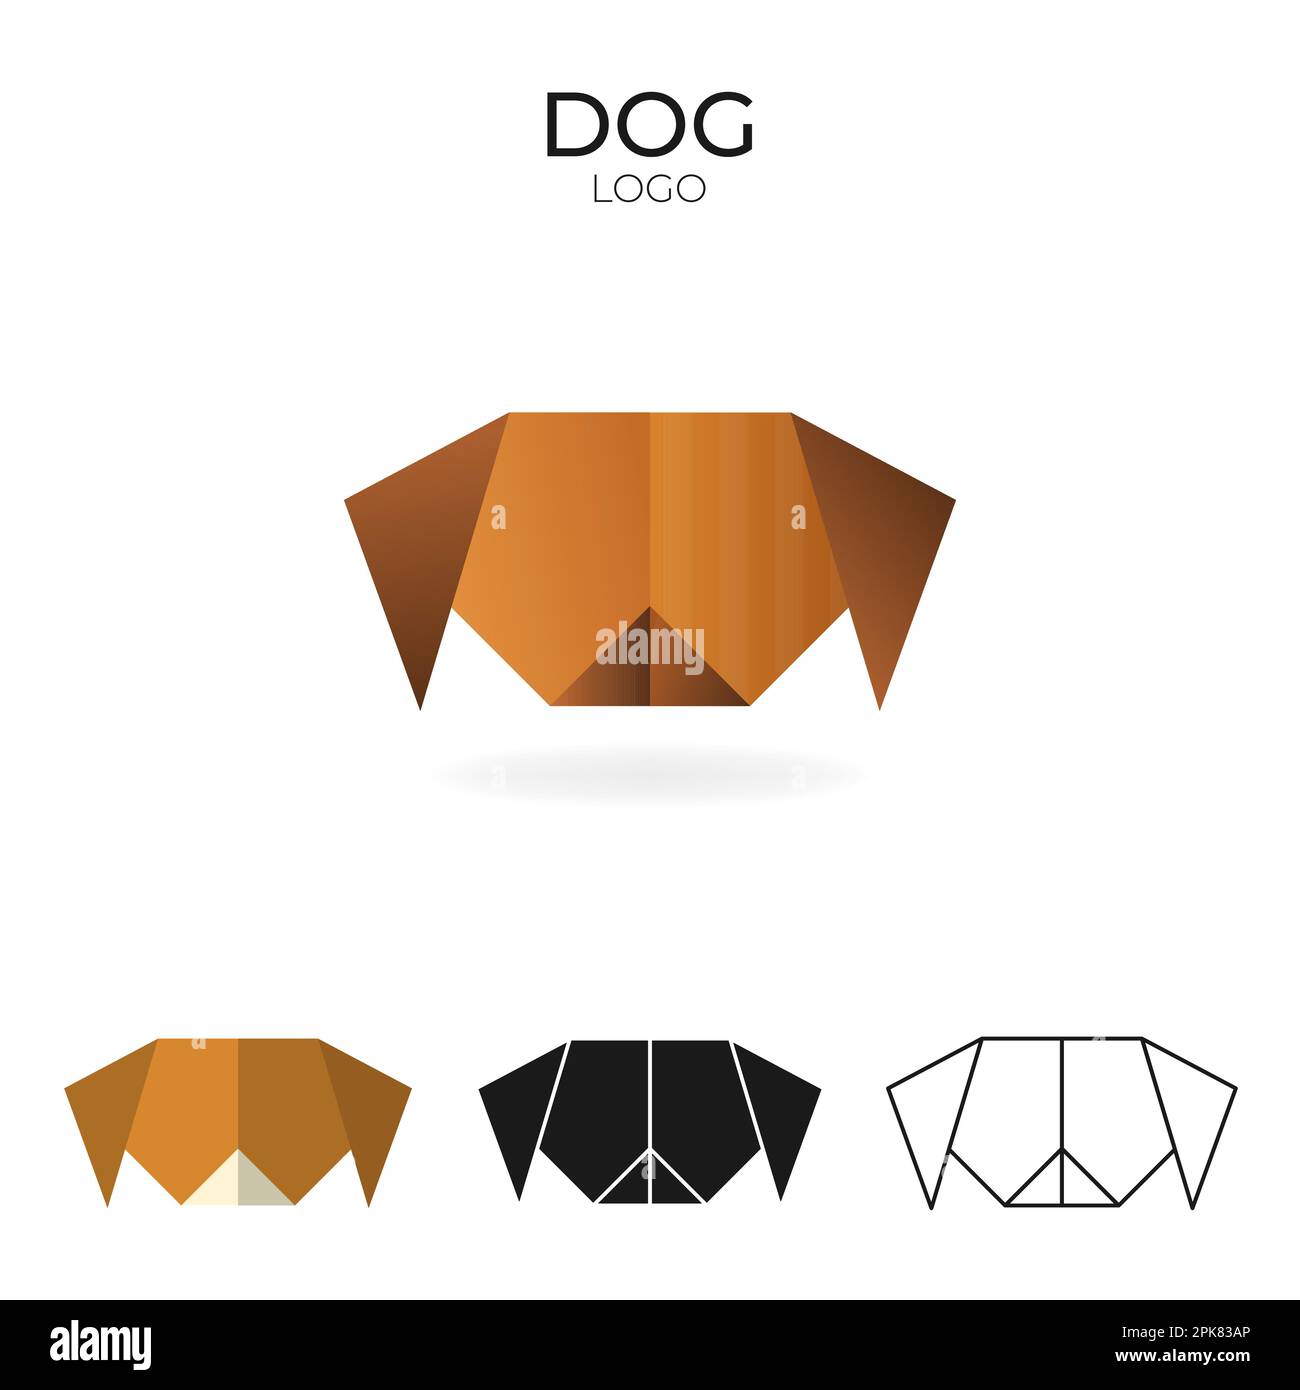 Origami vector logo and icon with dog.  Stock Vector